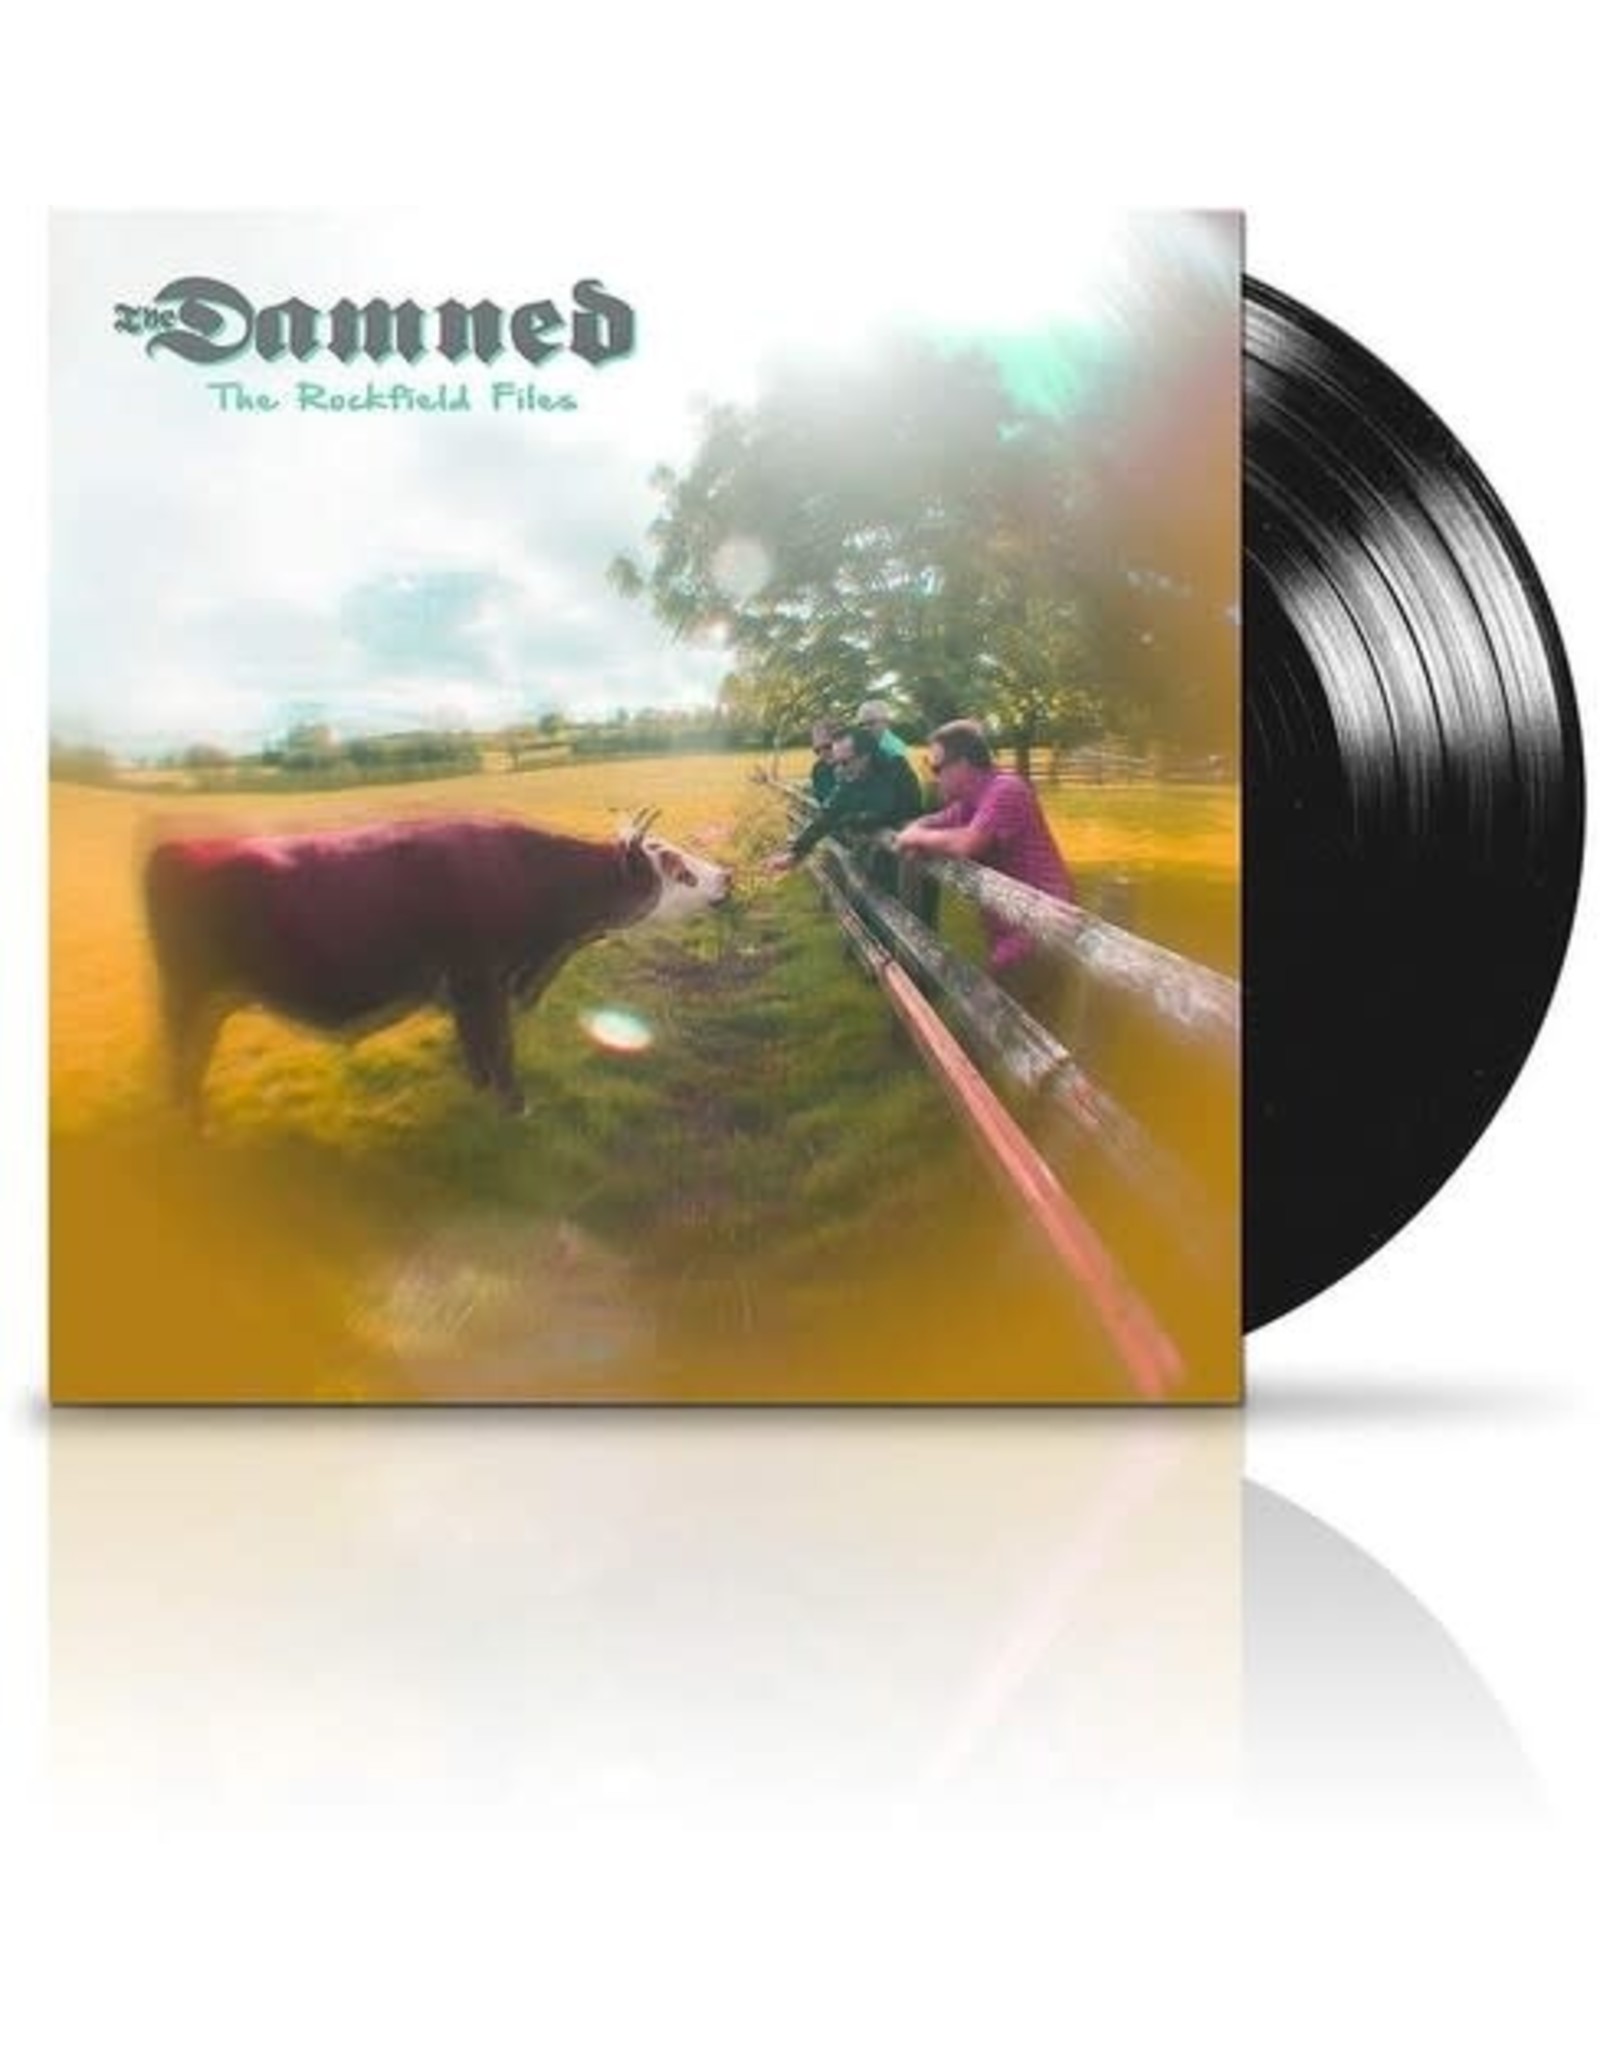 New Vinyl The Damned - The Rockfield Files EP 12"